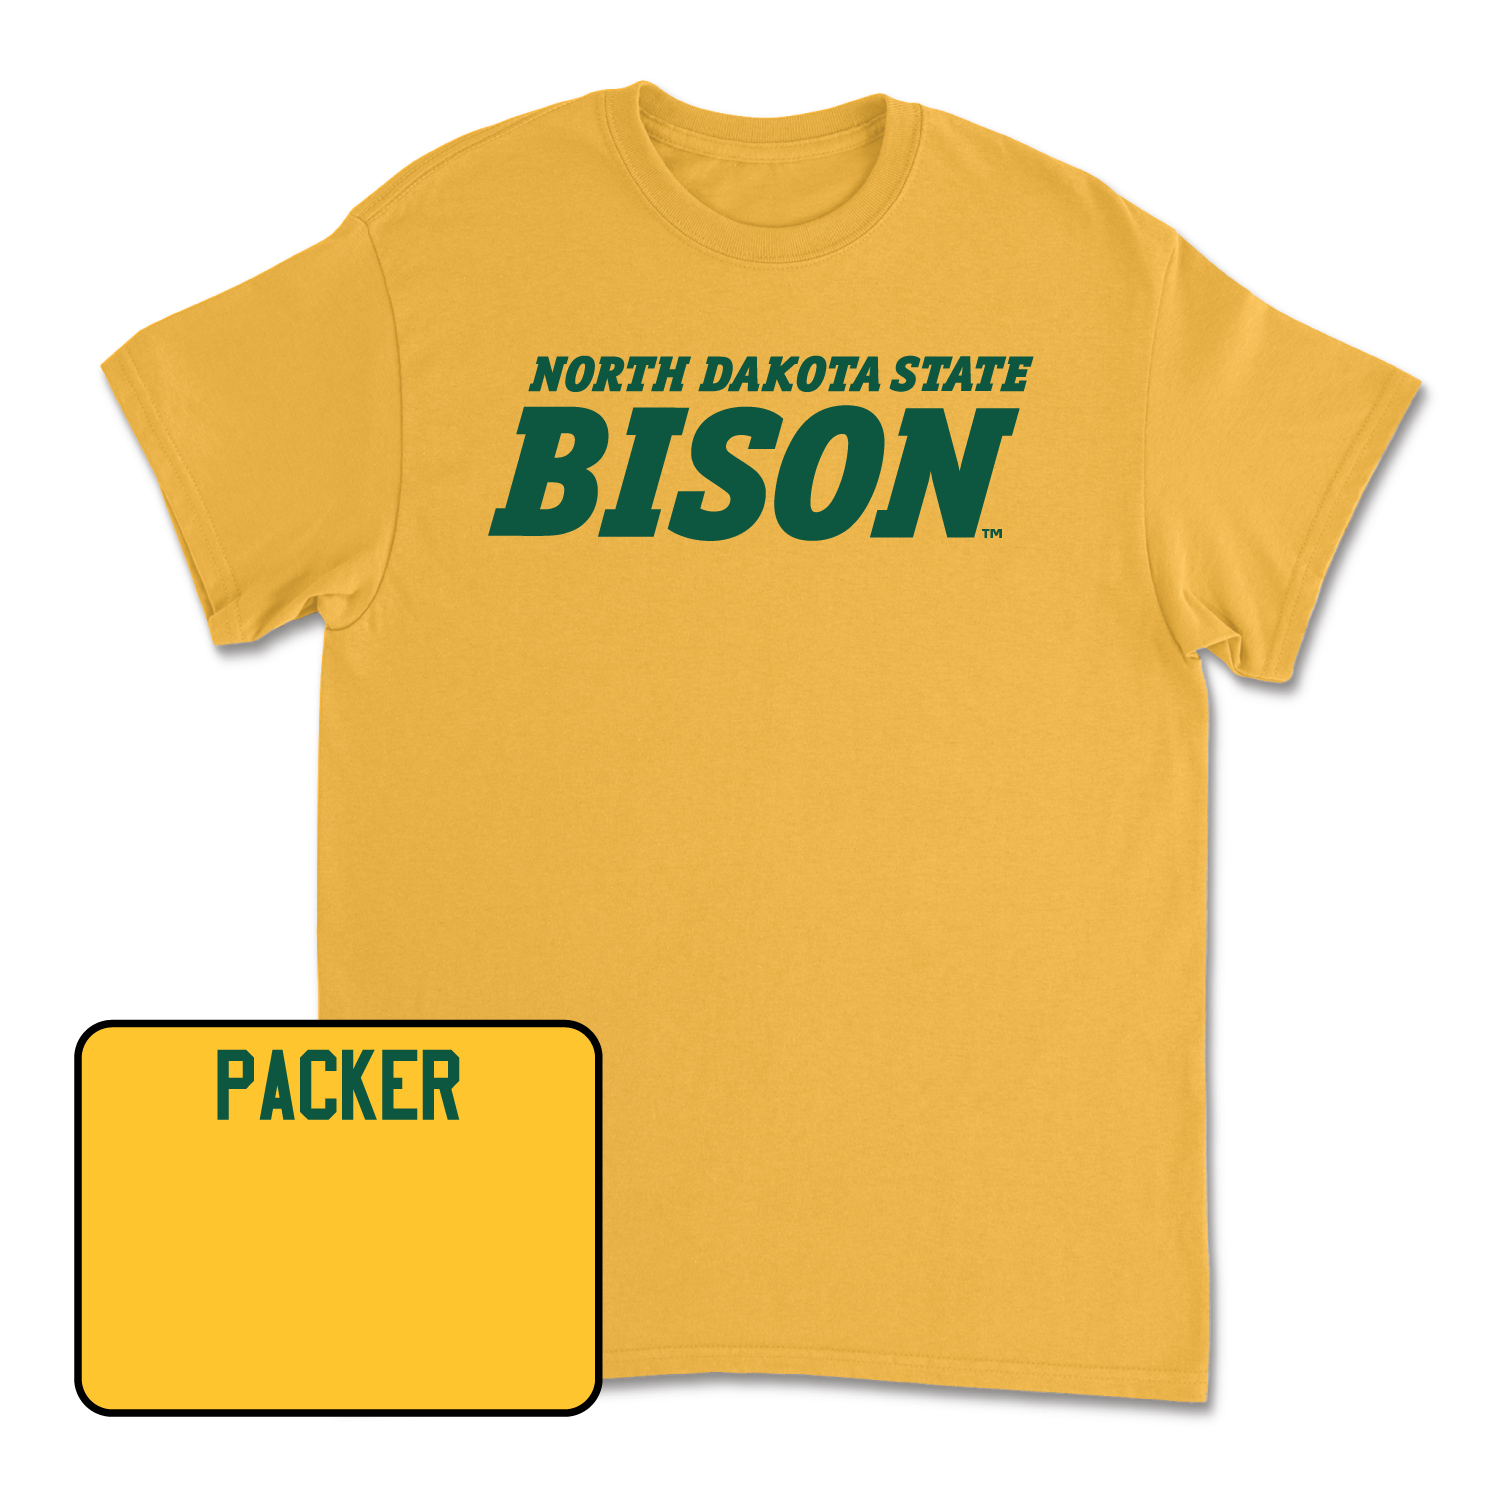 Gold Track & Field Bison Tee 3X-Large / Jack Packer